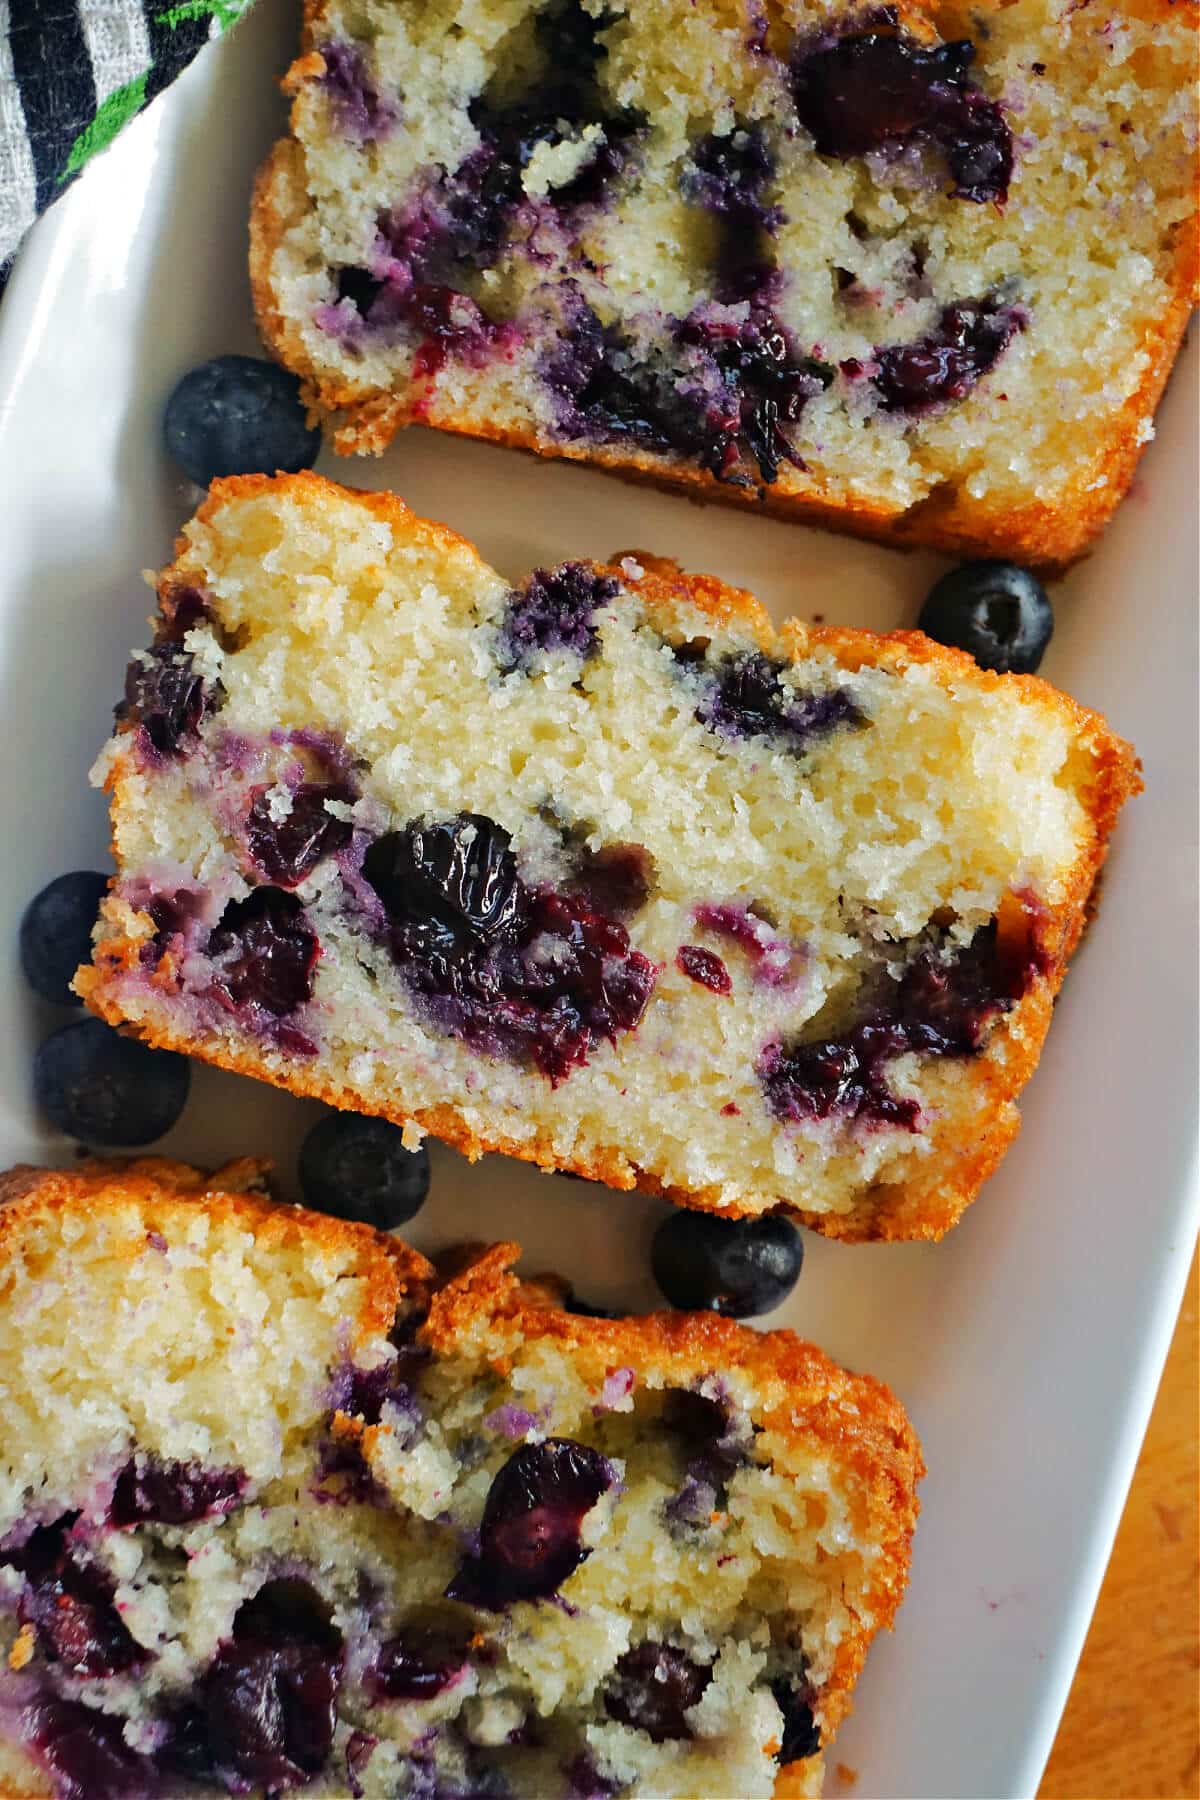 3 slices of blueberry cake on a white plate.